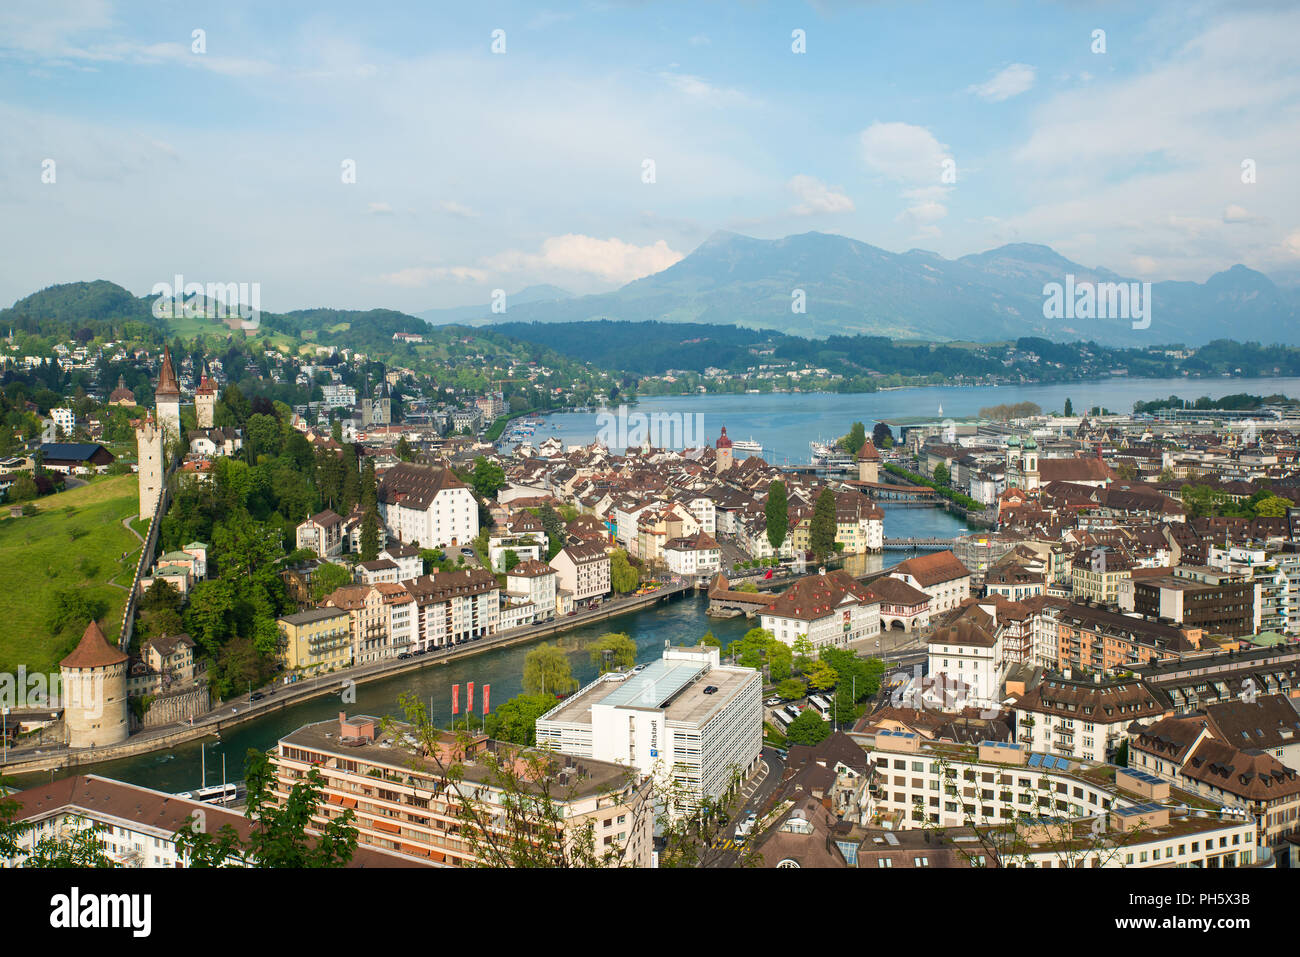 Aerial view of the old town, Lucerne city with lake Lucerne and Rigi mountain in background, Switzerland. Stock Photo